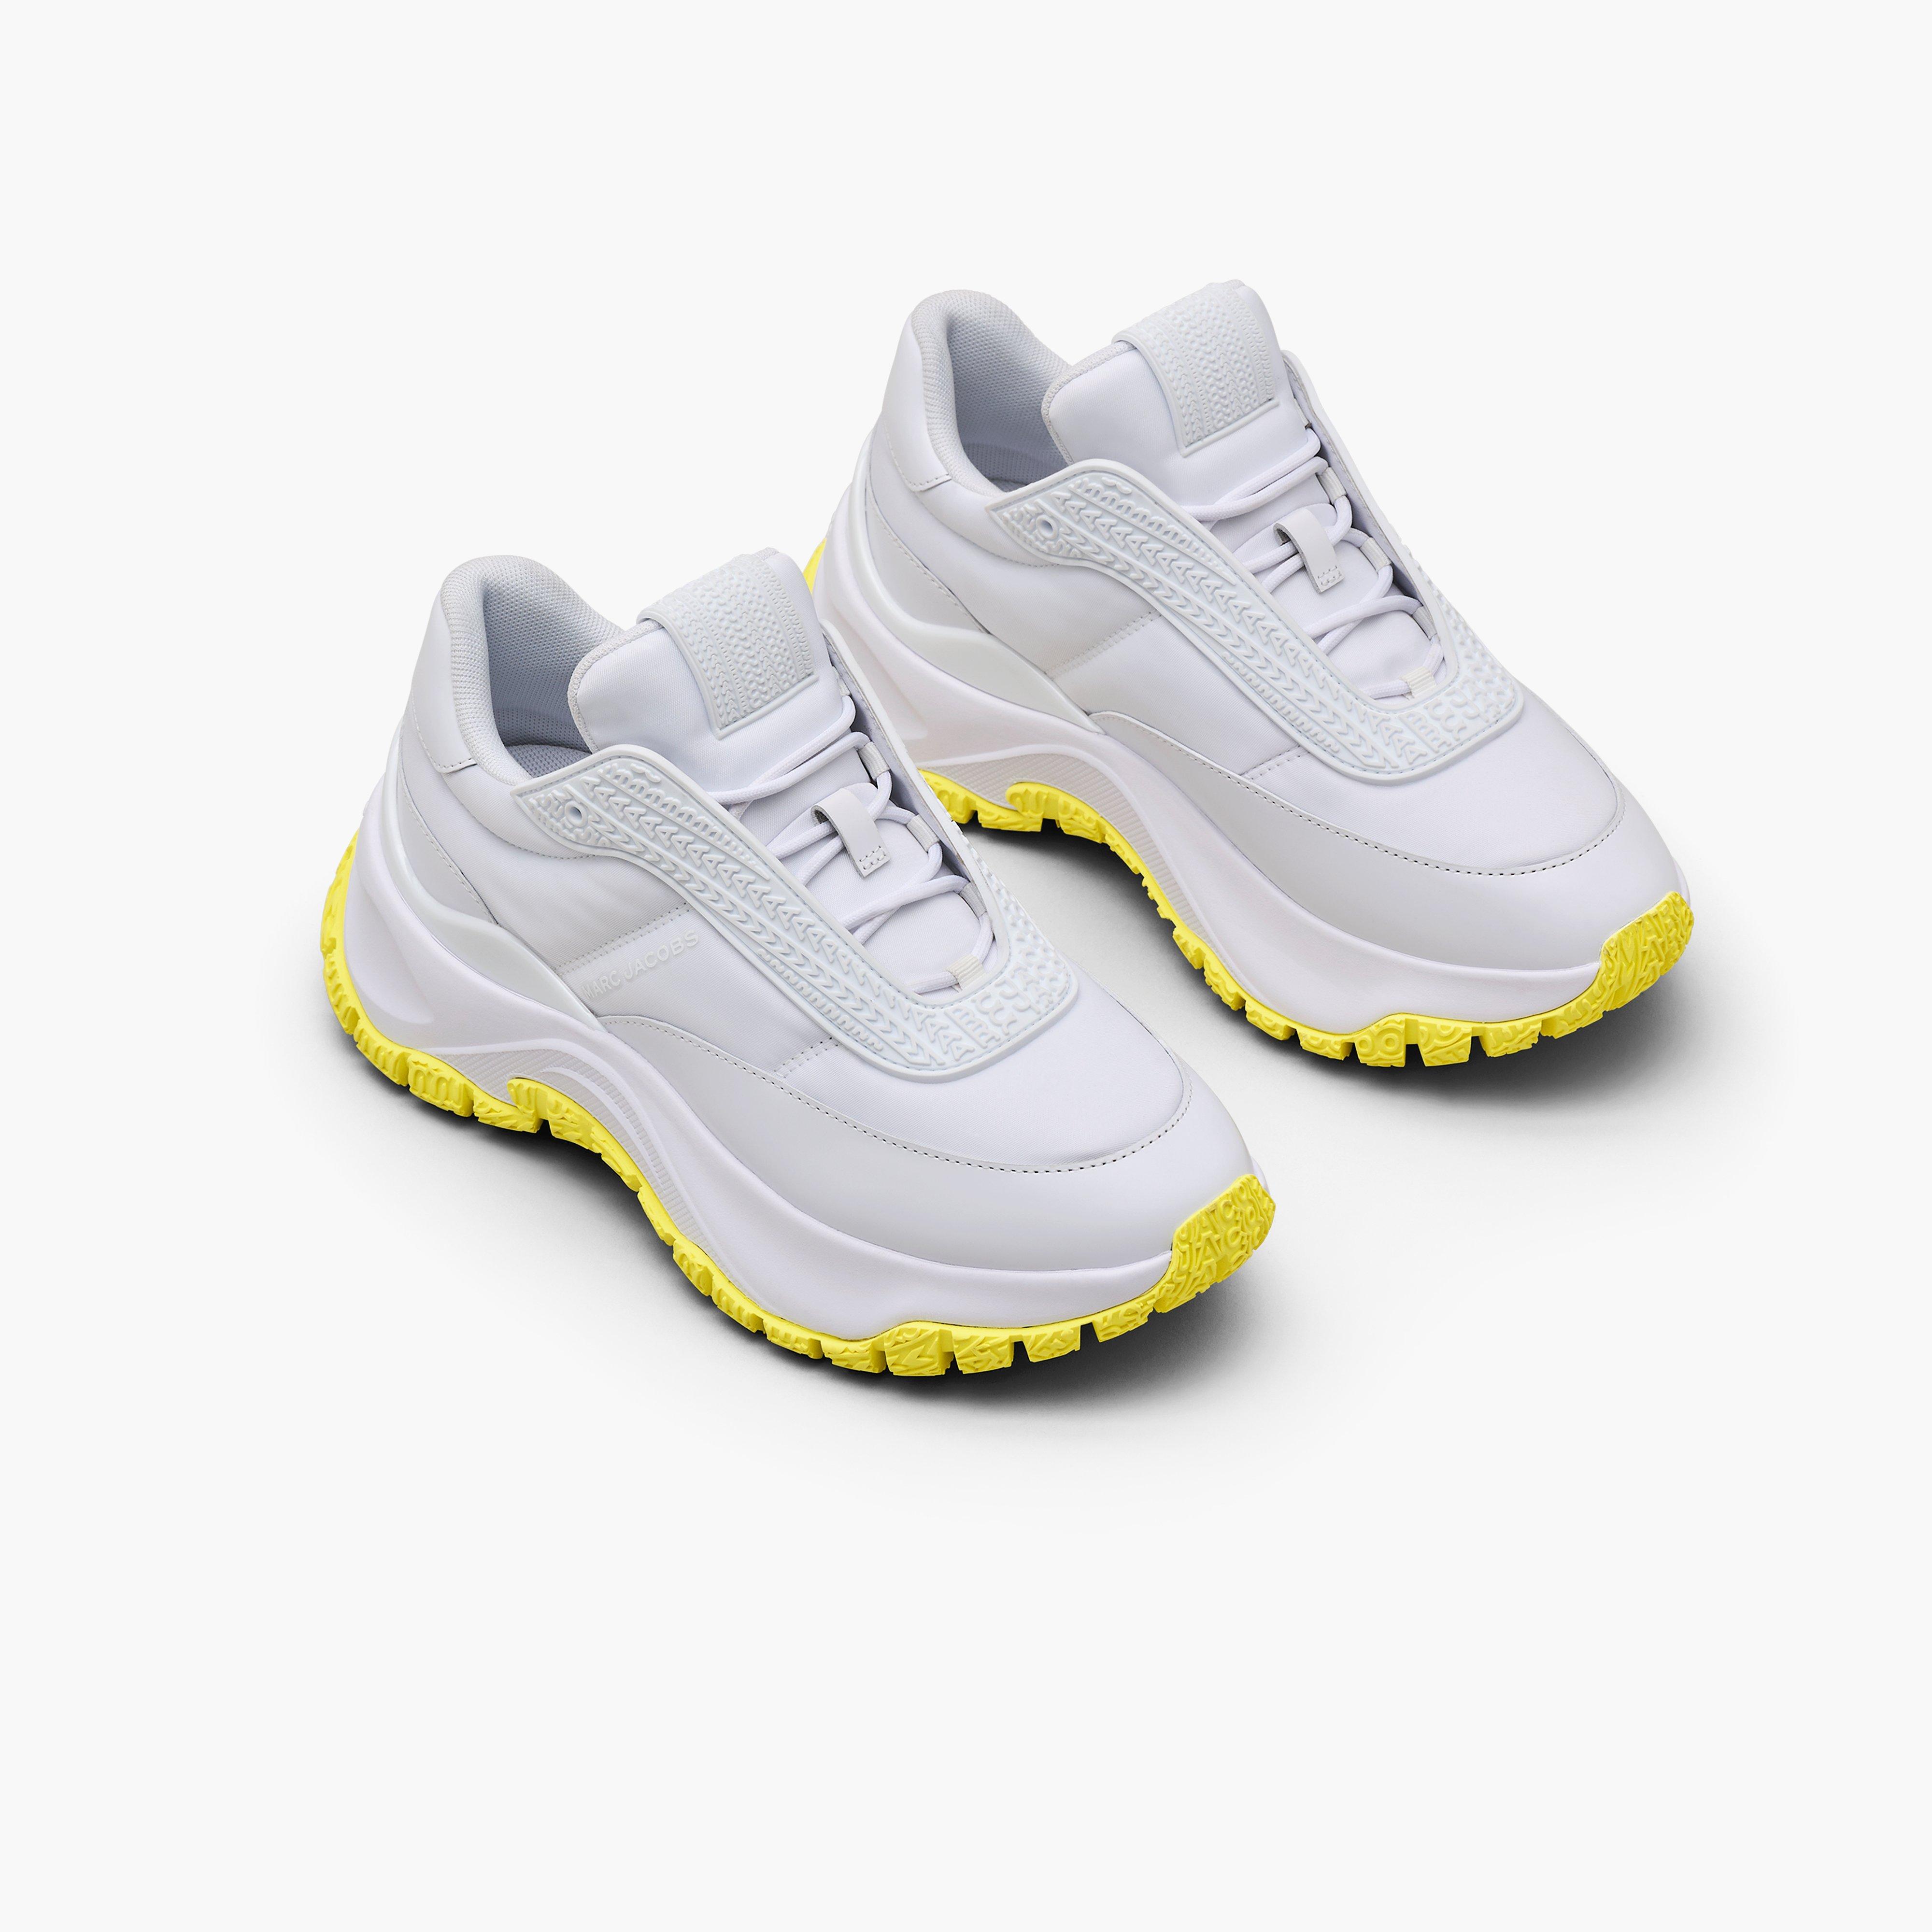 Marc by Marc jacobs The Lazy Runner,WHITE/YELLOW